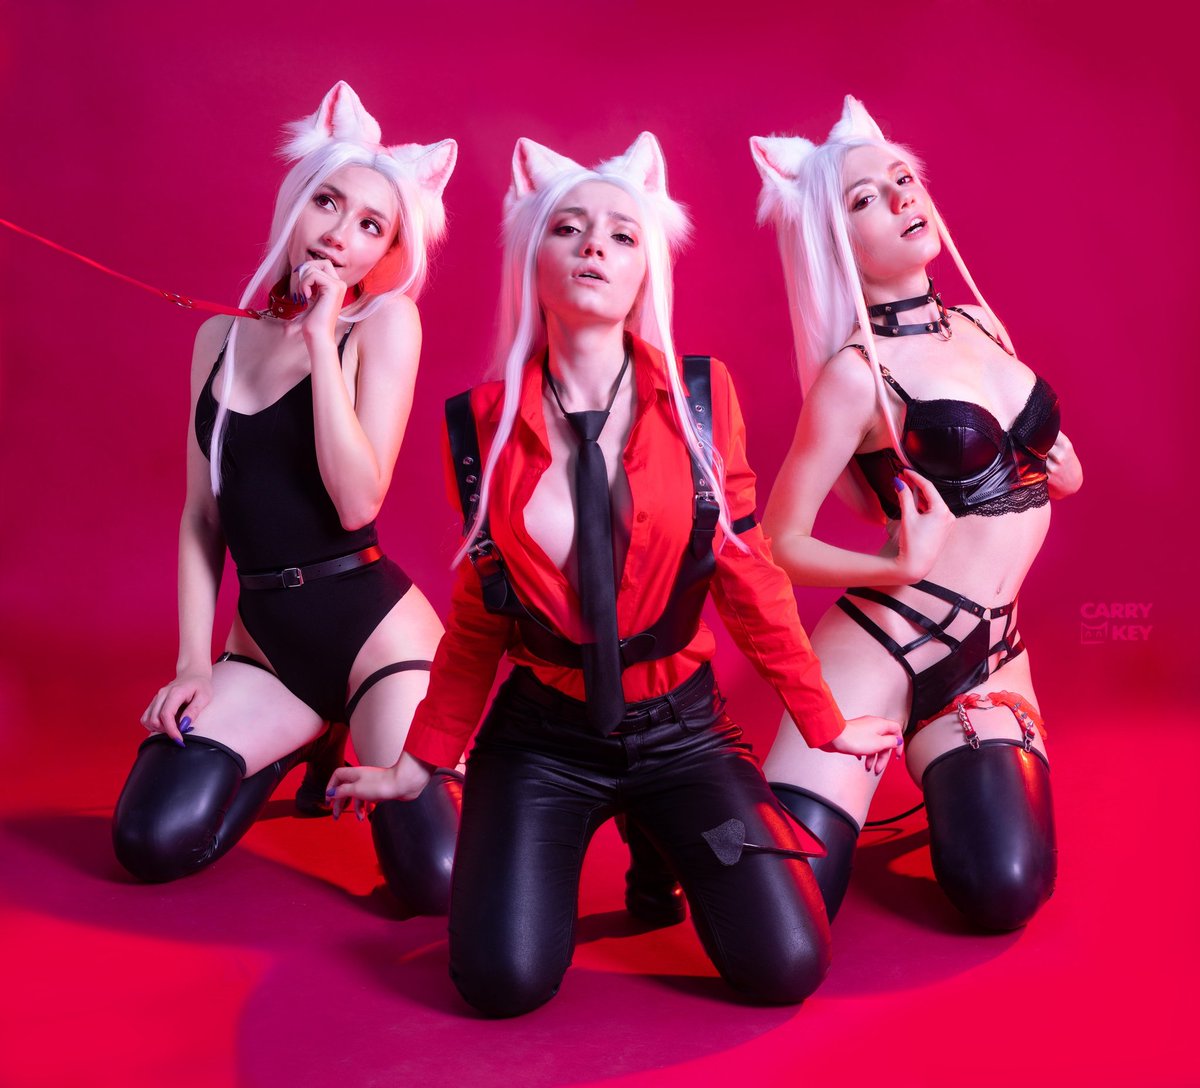 3 Carry in 1 pic Sexy Cerberus spoiler for October Would you like to be my Helltaker...